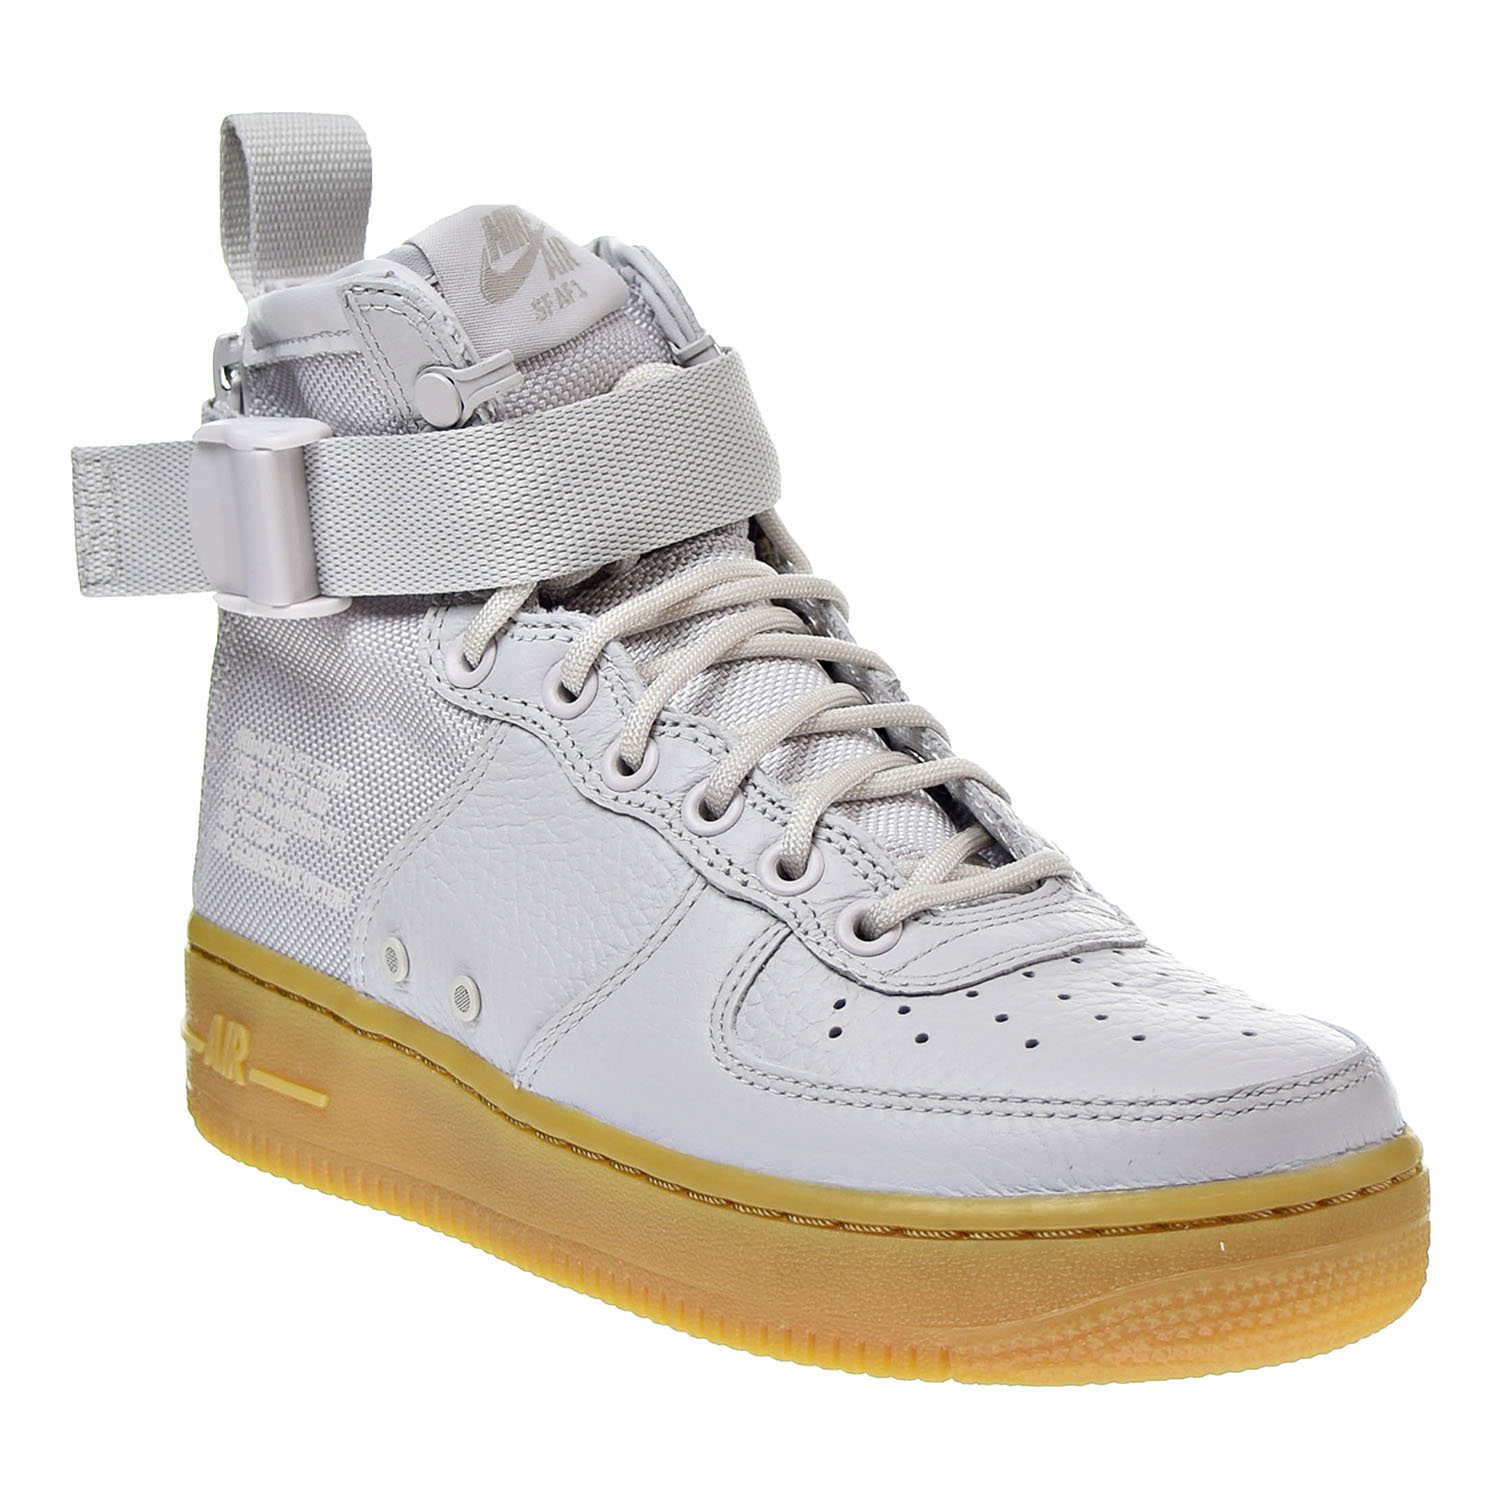 Nike SF Air Force 1 Mid Women's Shoes 